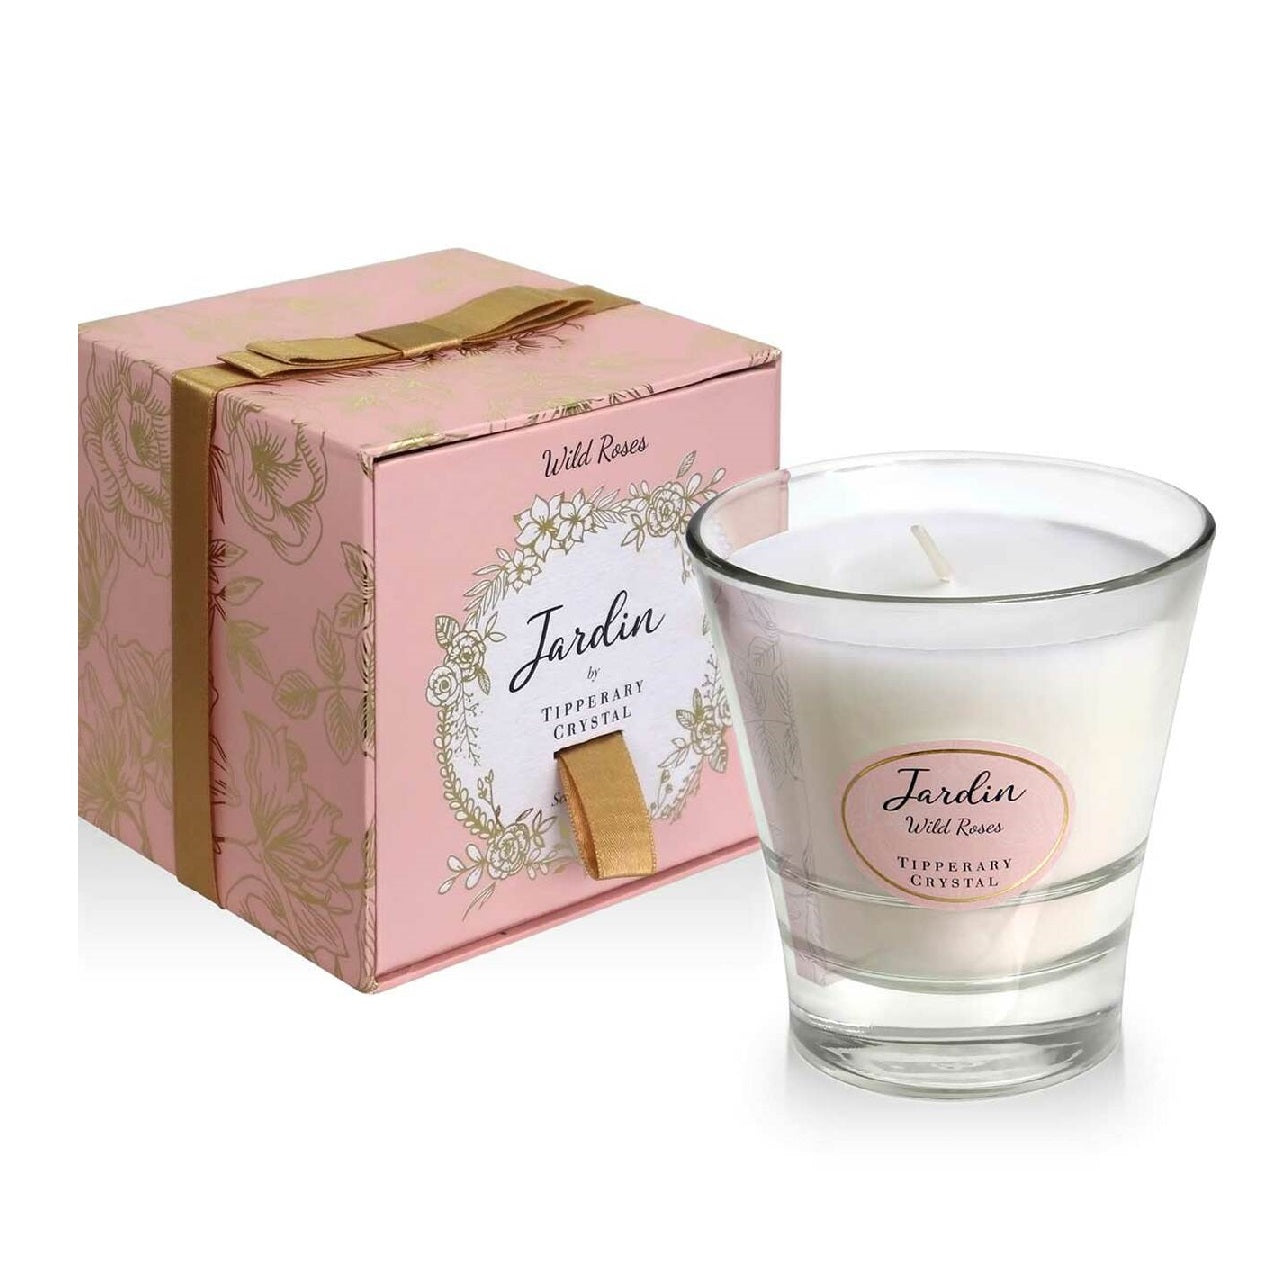 Tipperary Crystal Wild Roses Jardin Collection Candle  The new Jardin Candle Collection from Tipperary Crystal.  Wild Roses The scent of Wild Rose evokes the feeling of being in a beautiful summer garden. This scent has a predominantly balsamic, spicy, warm scent intertwined with the bouquet of warm earth and honey. While similar to our ever popular Red Roses, Wild Roses has a more earthy spicy tone creating a mystical, more intriguing bouquet.